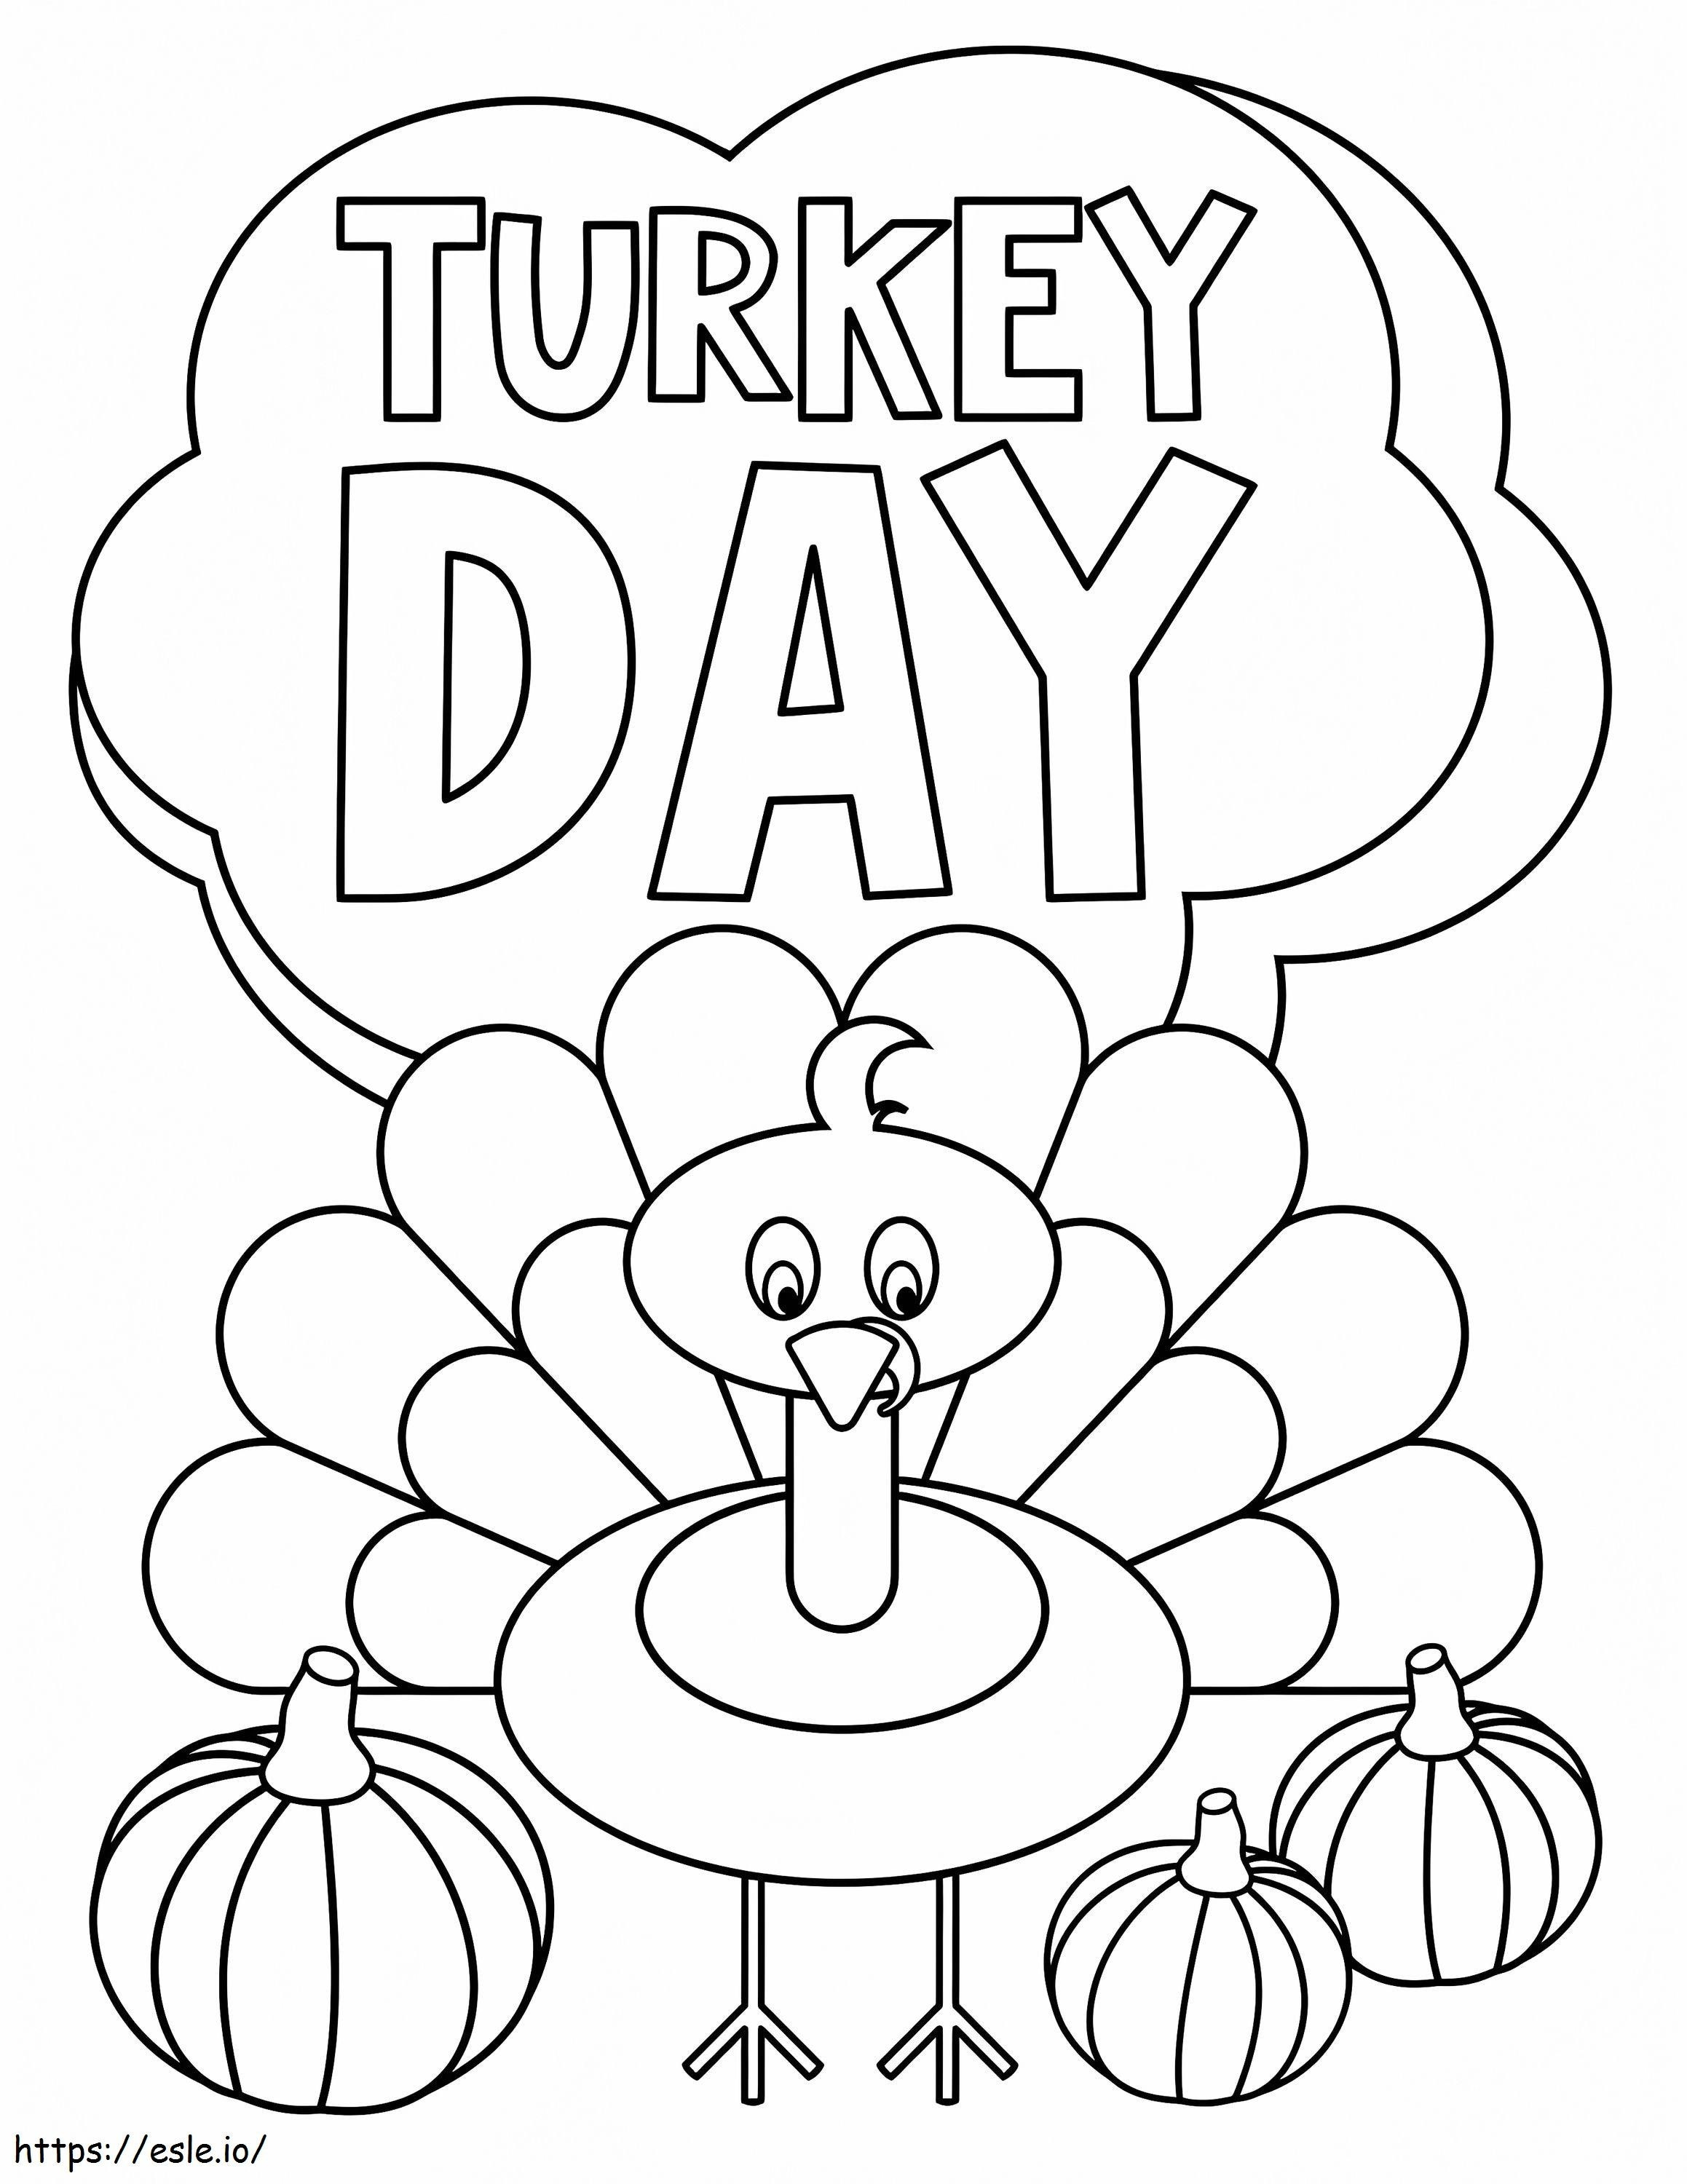 1588838288 1569516479Thanksgiving Turkey Day coloring page